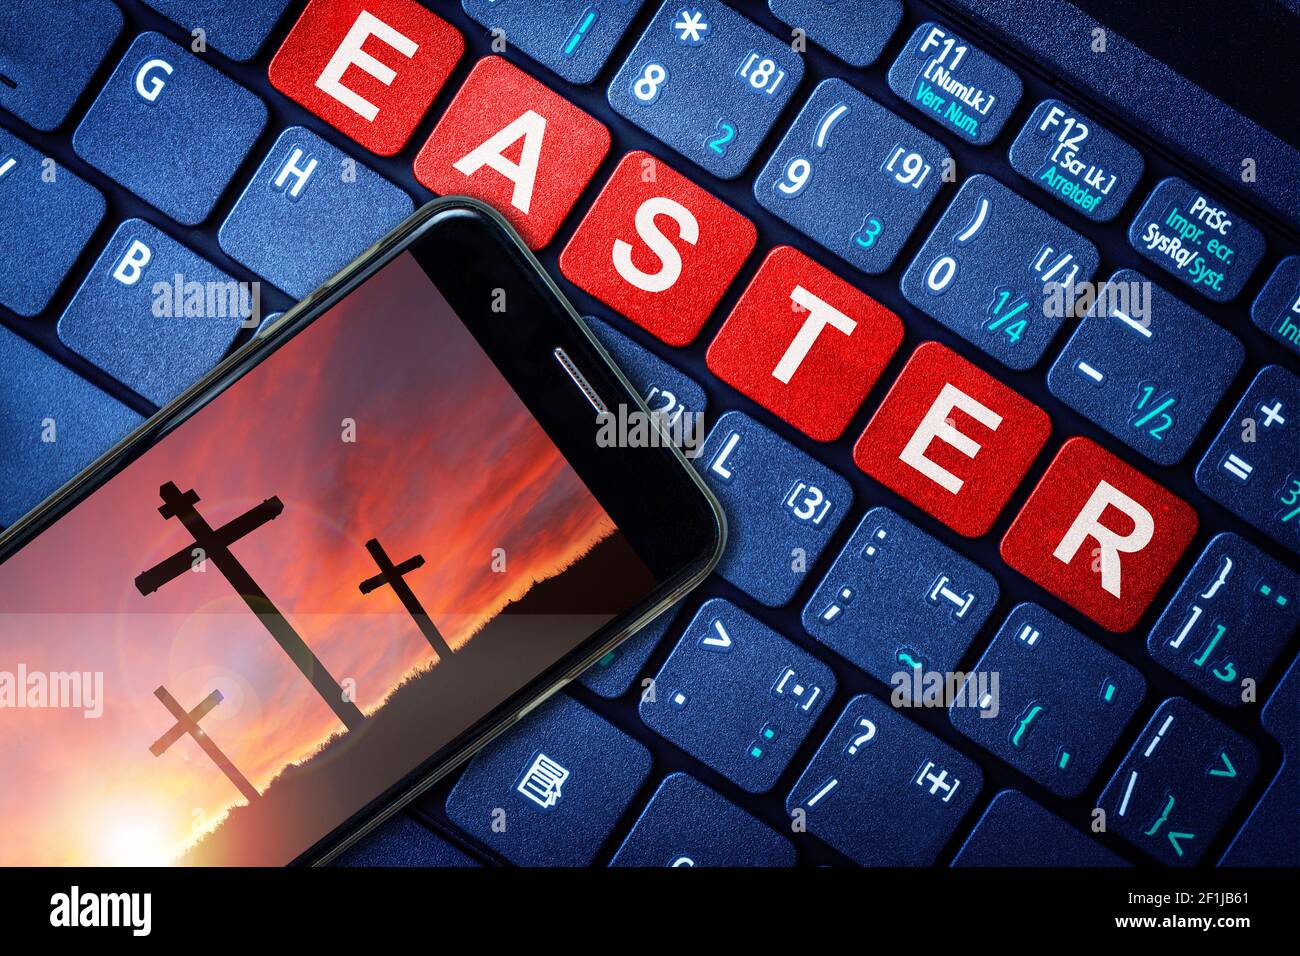 Smartphone showing symbol of Christian cross against a dramatic sunset on Good Friday or Easter Sunday. New Normal religious observance via online liv Stock Photo